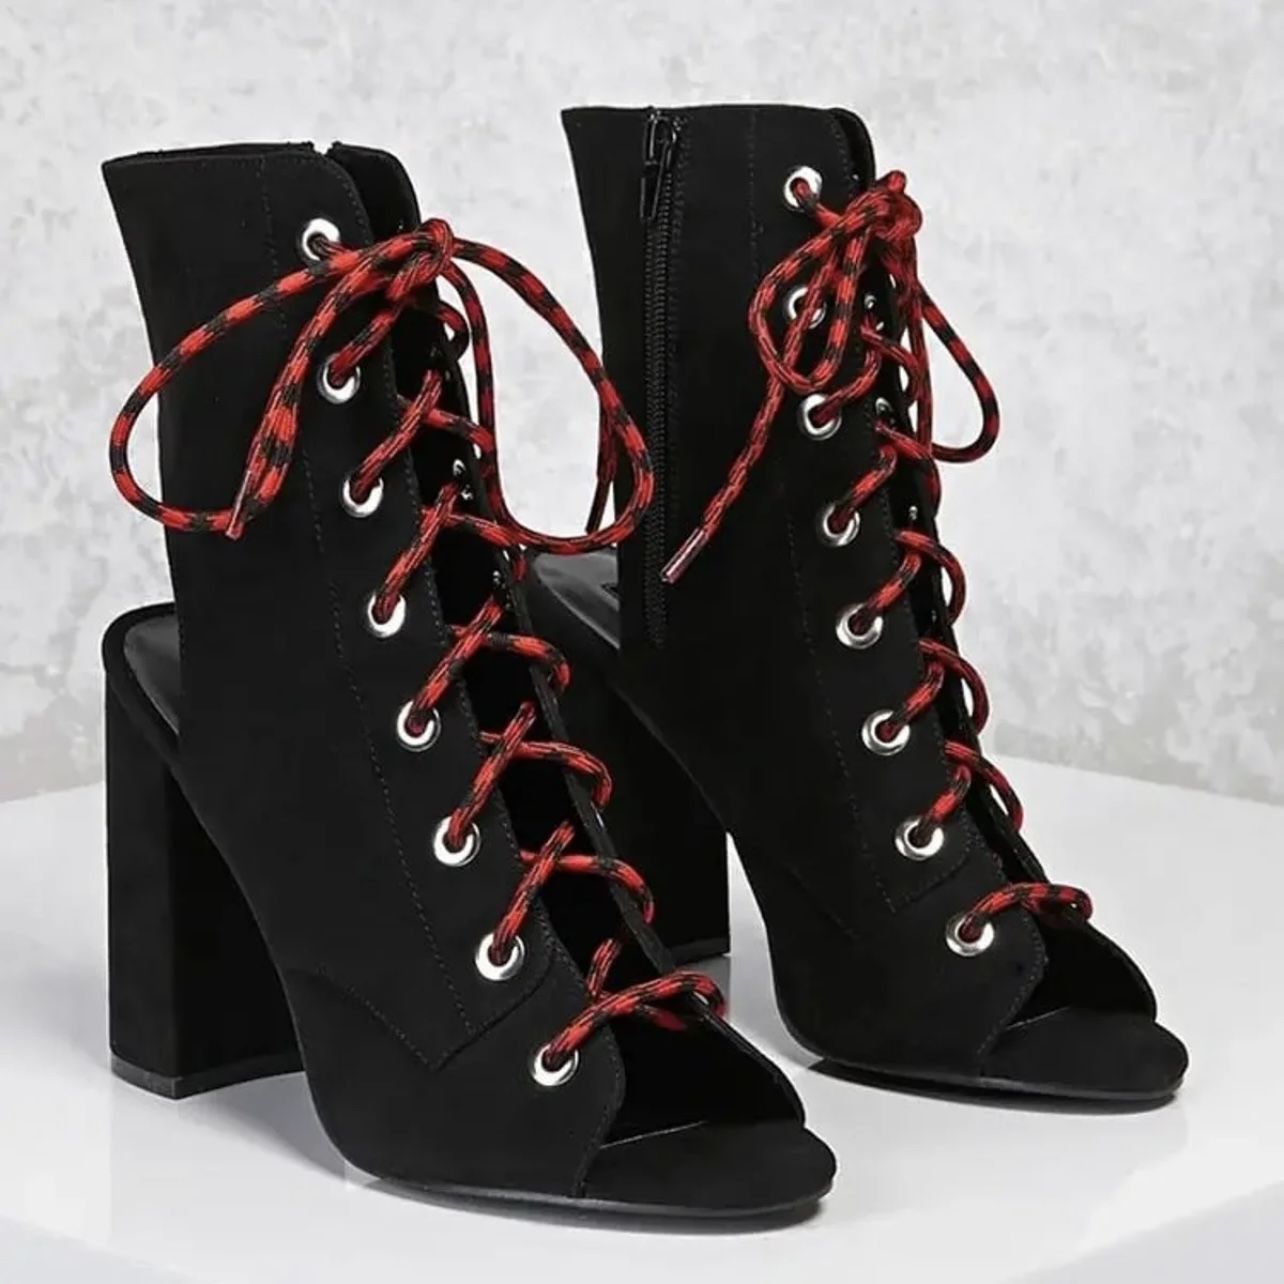 FOREVER 21 Black Lace Up Open Toe Ankle Booties 